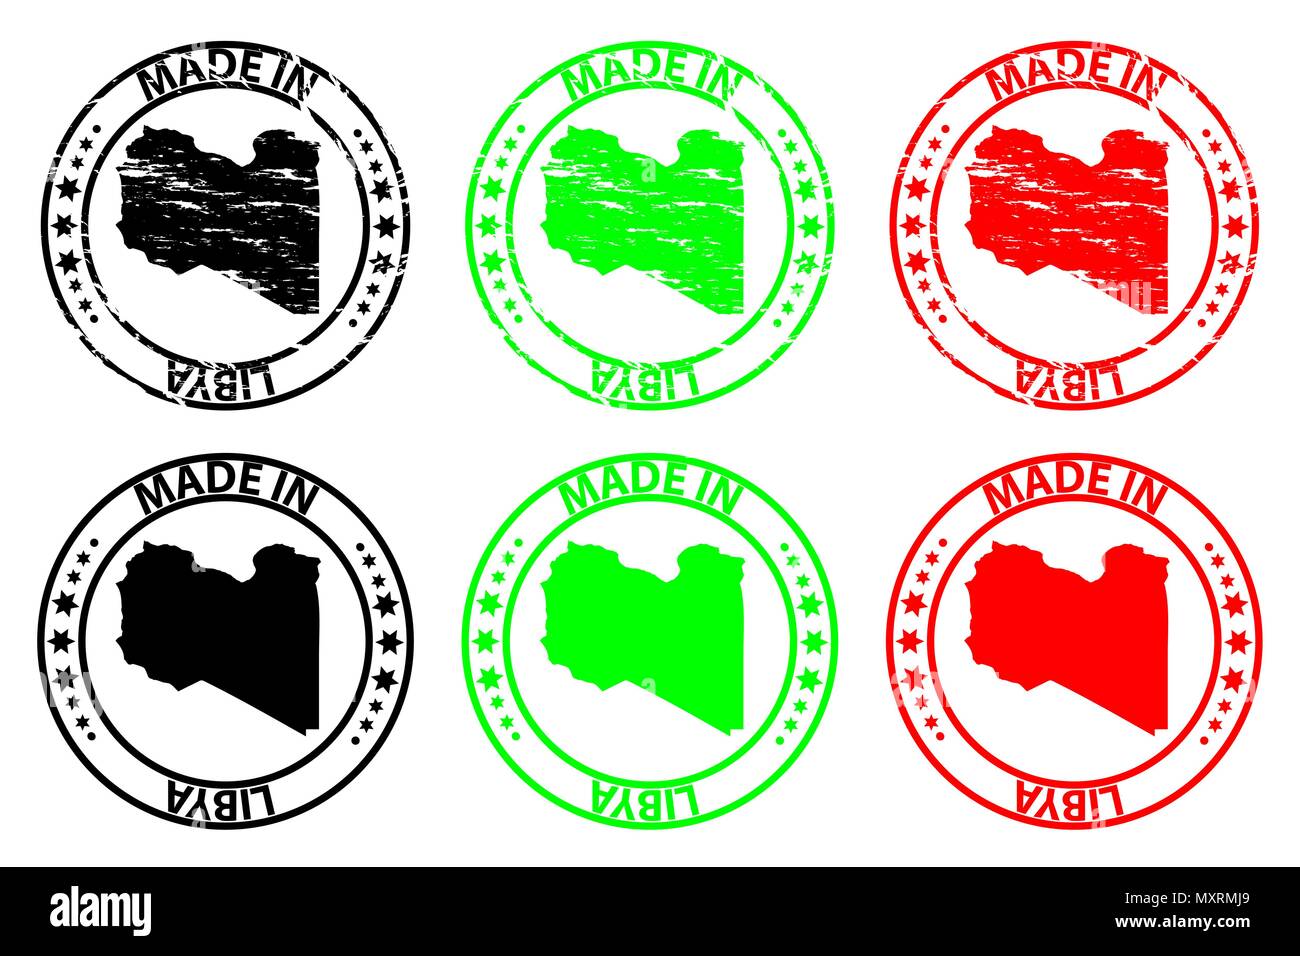 Made in Libya - rubber stamp - vector, Libya map pattern - black, green and red Stock Vector